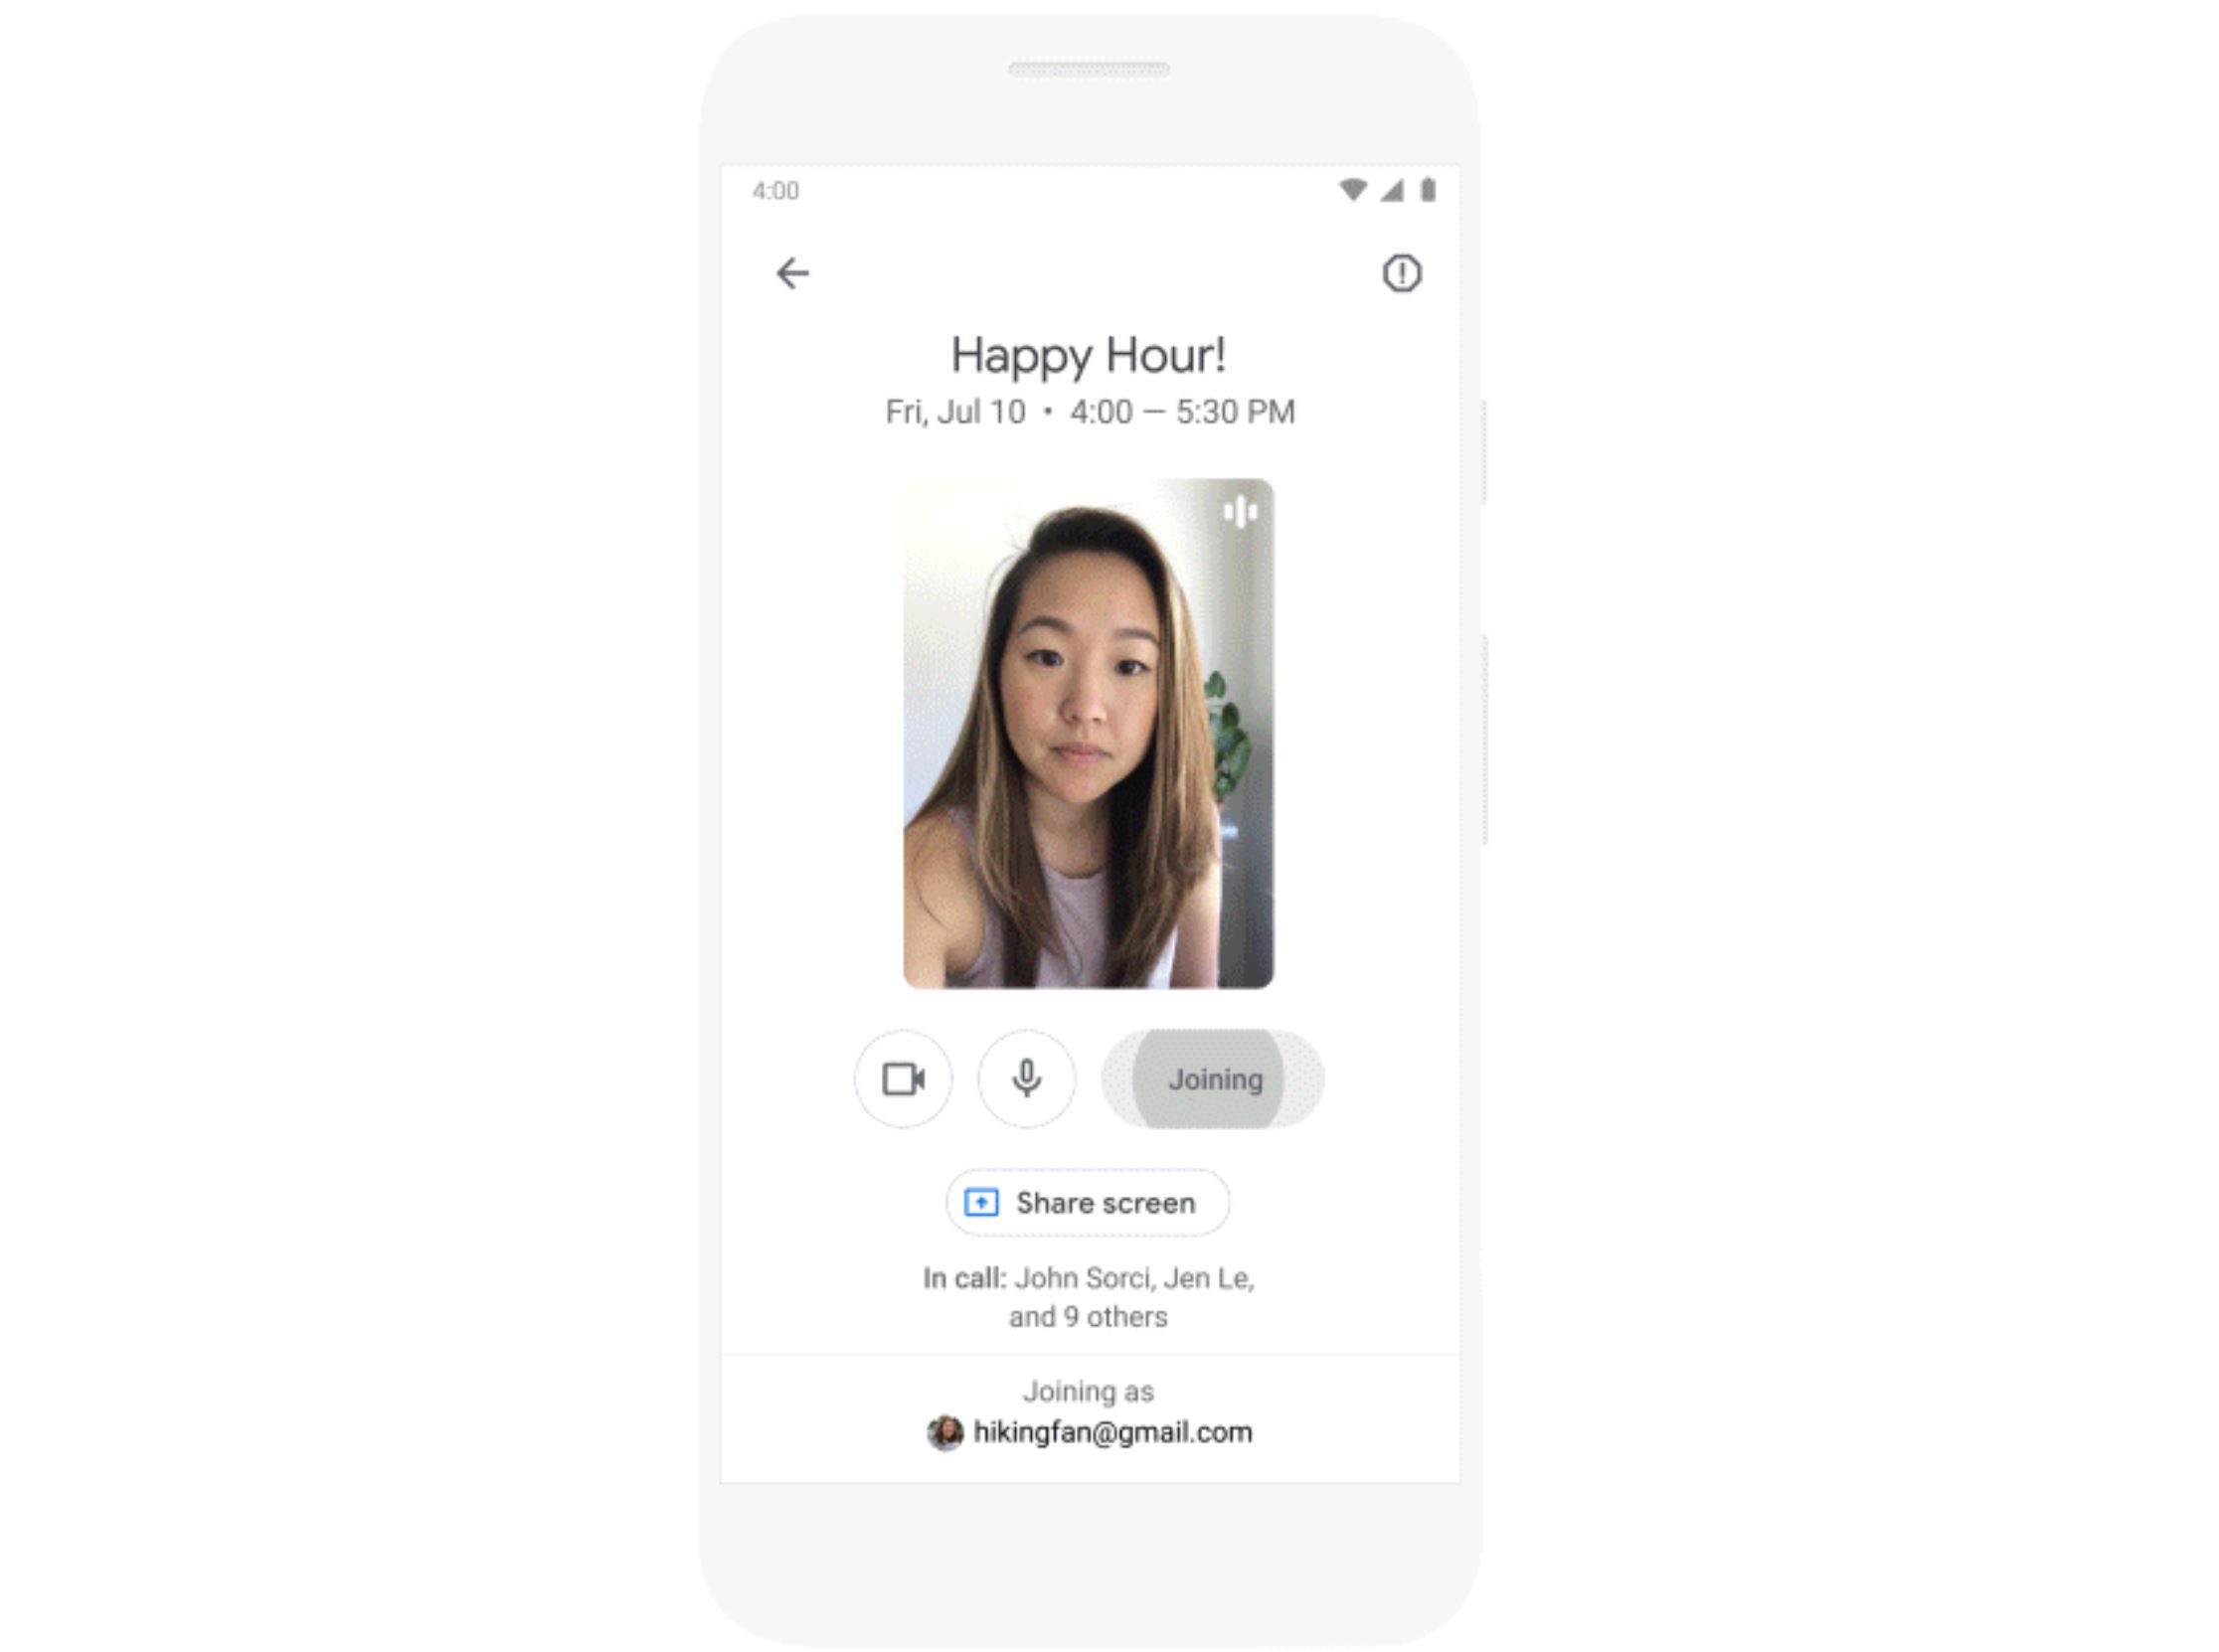 Google Meet ‘companion mode’ now available on your phone